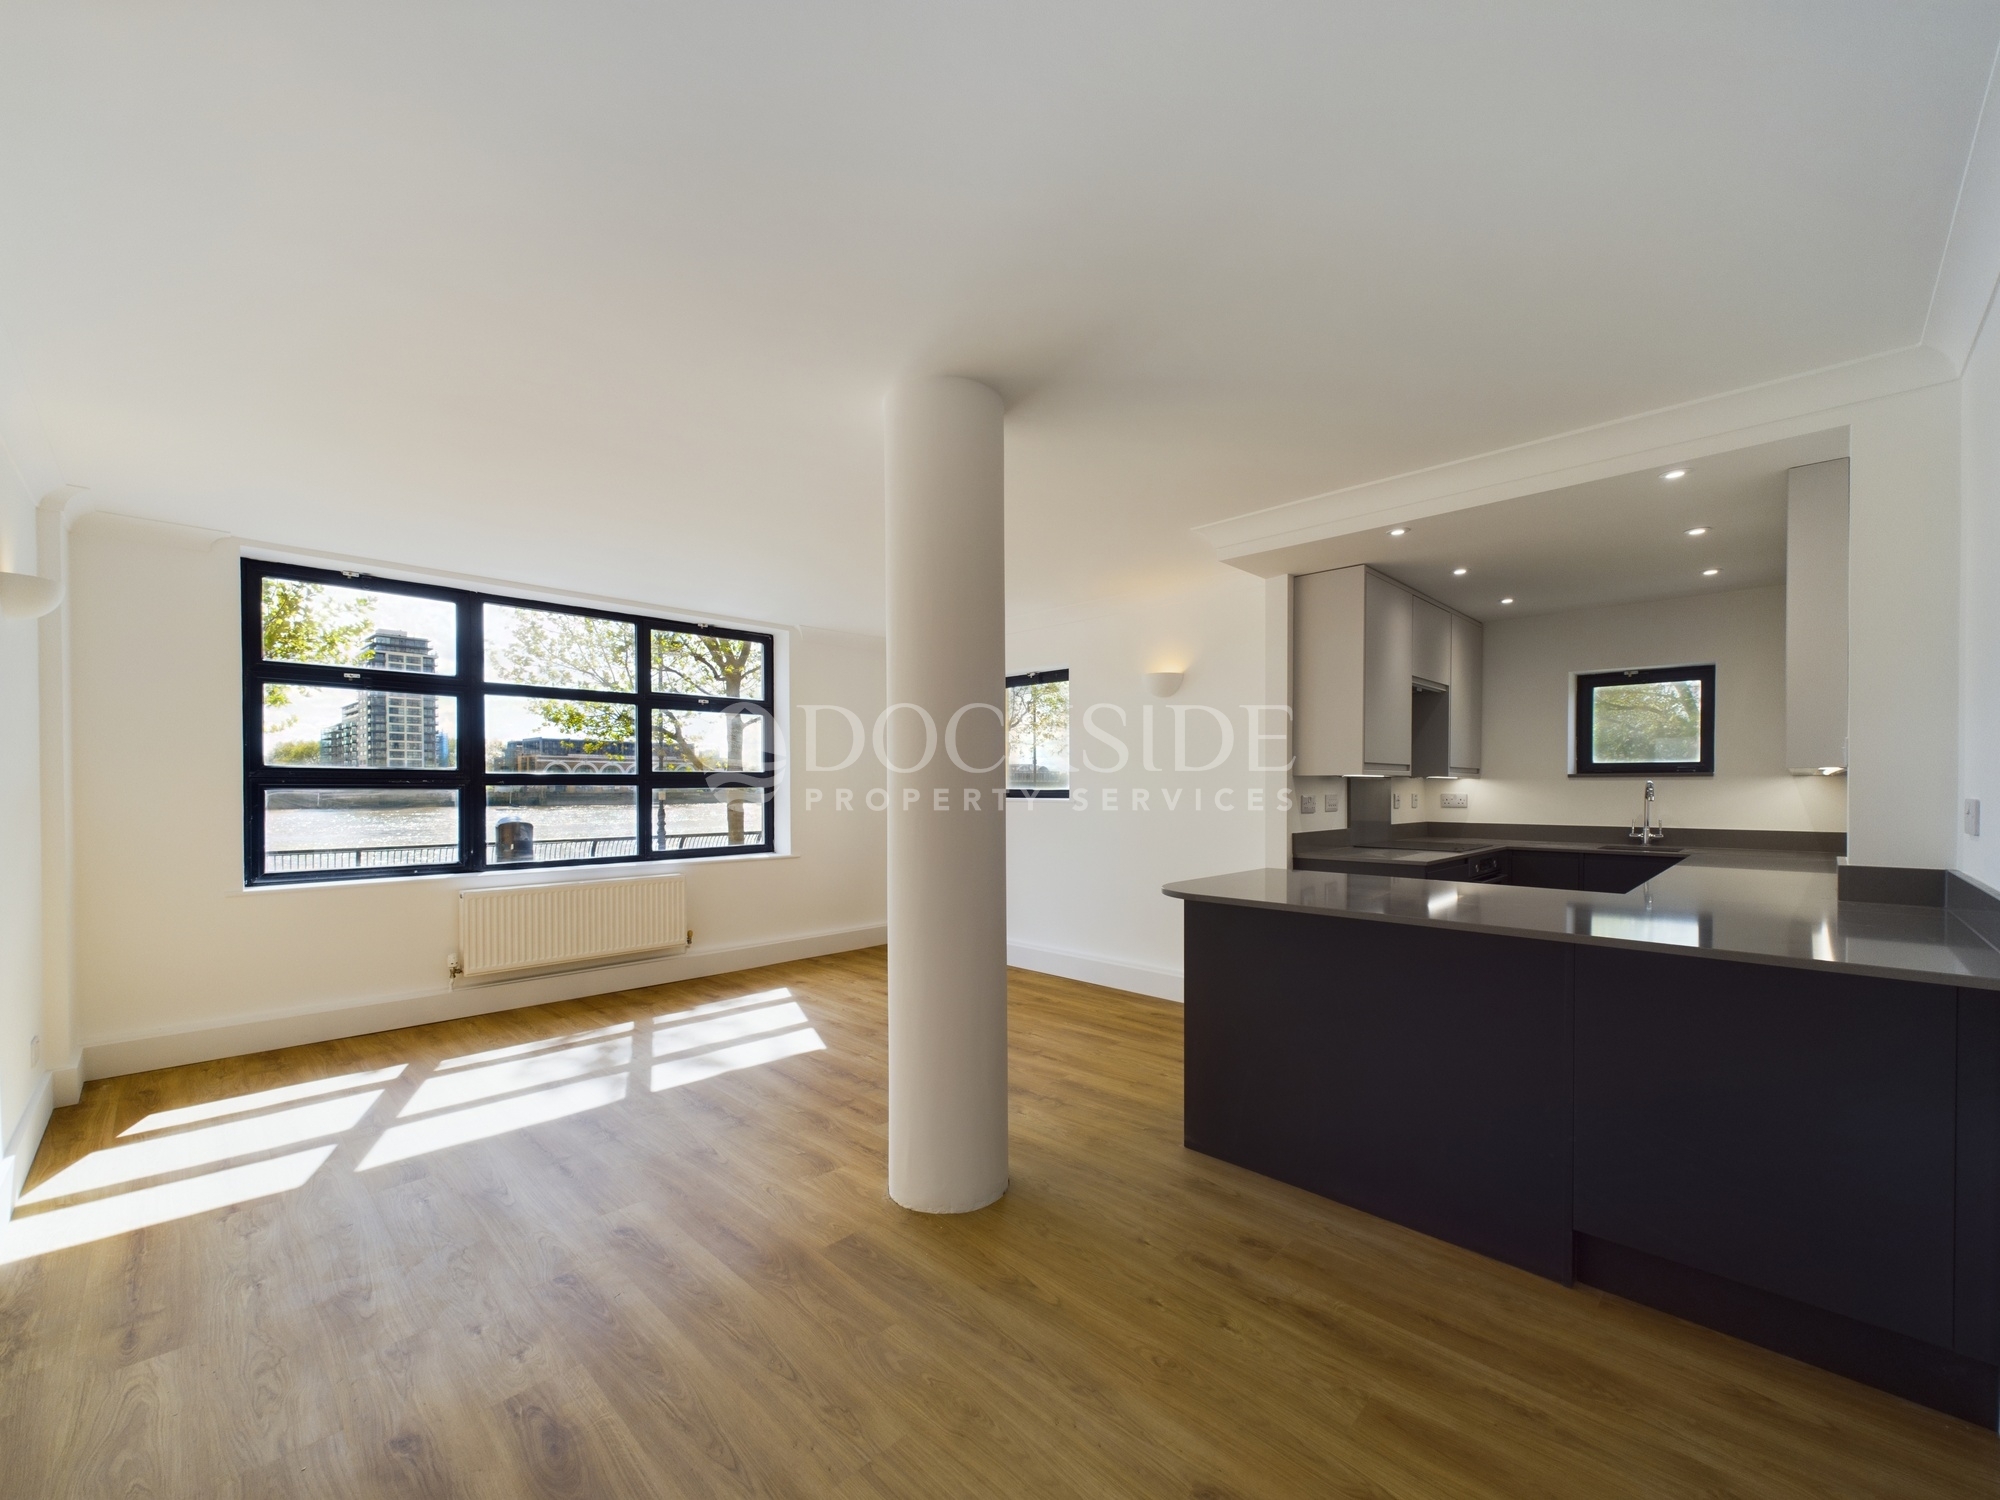 2 bed to rent in Burrells Wharf Square, London, E14 